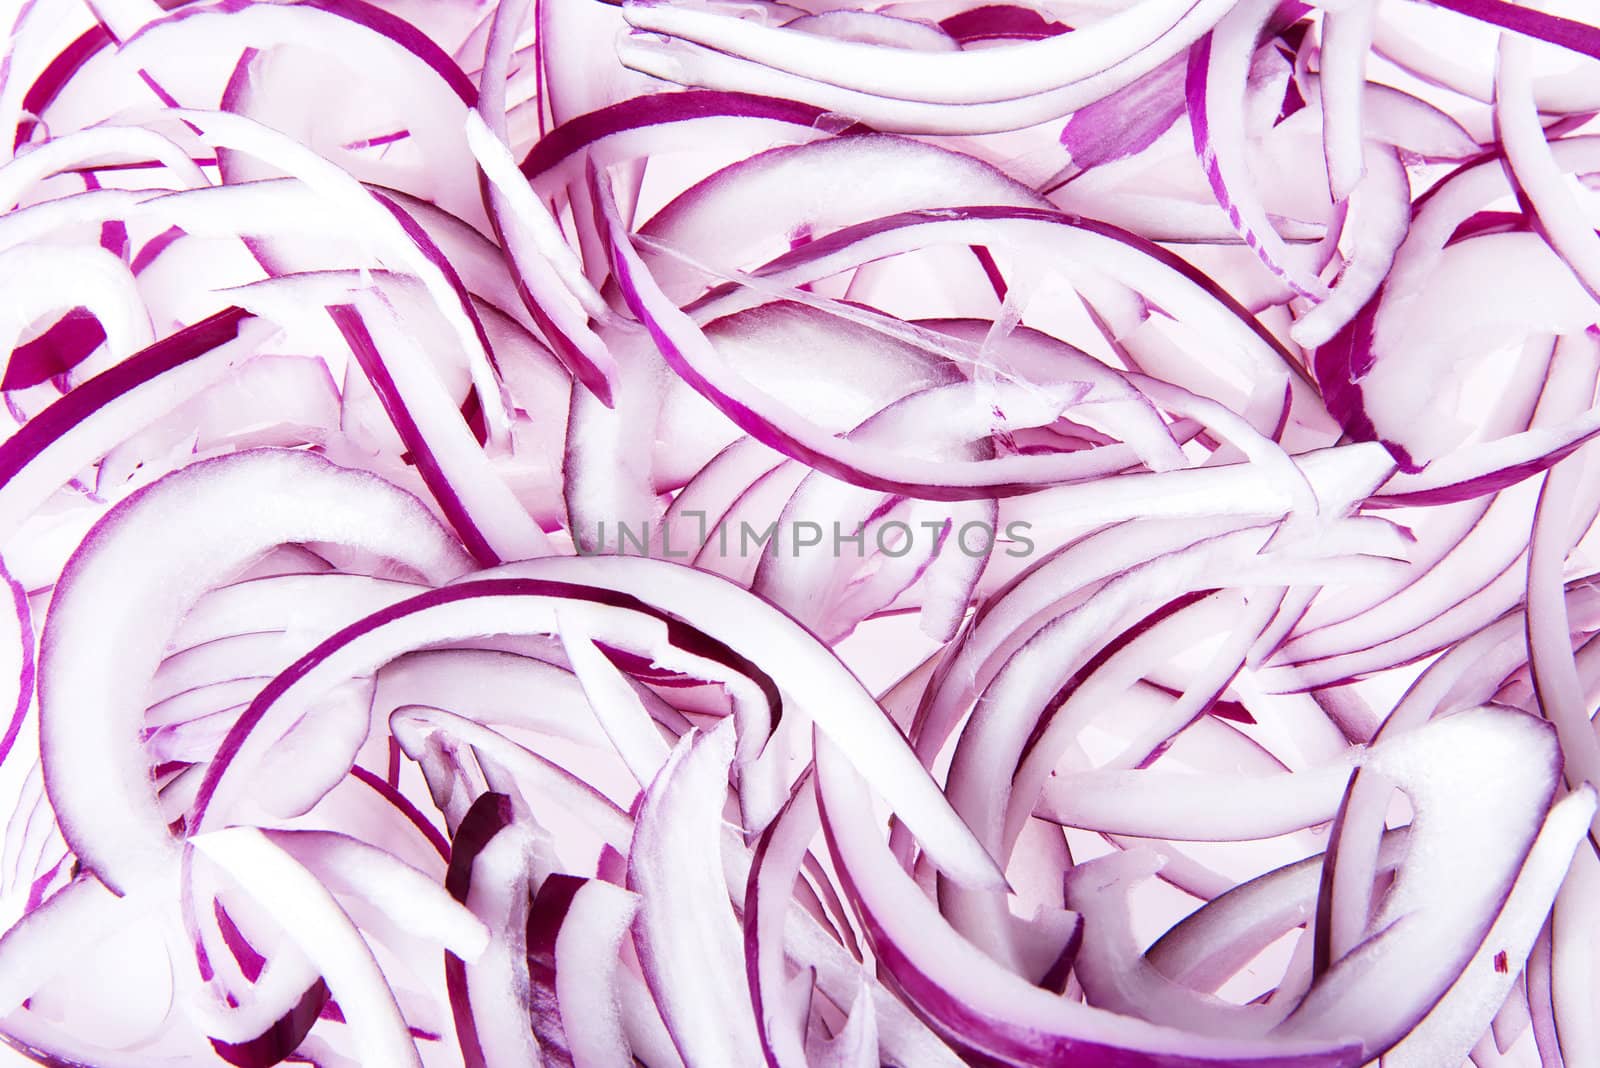 Sliced red onion for background